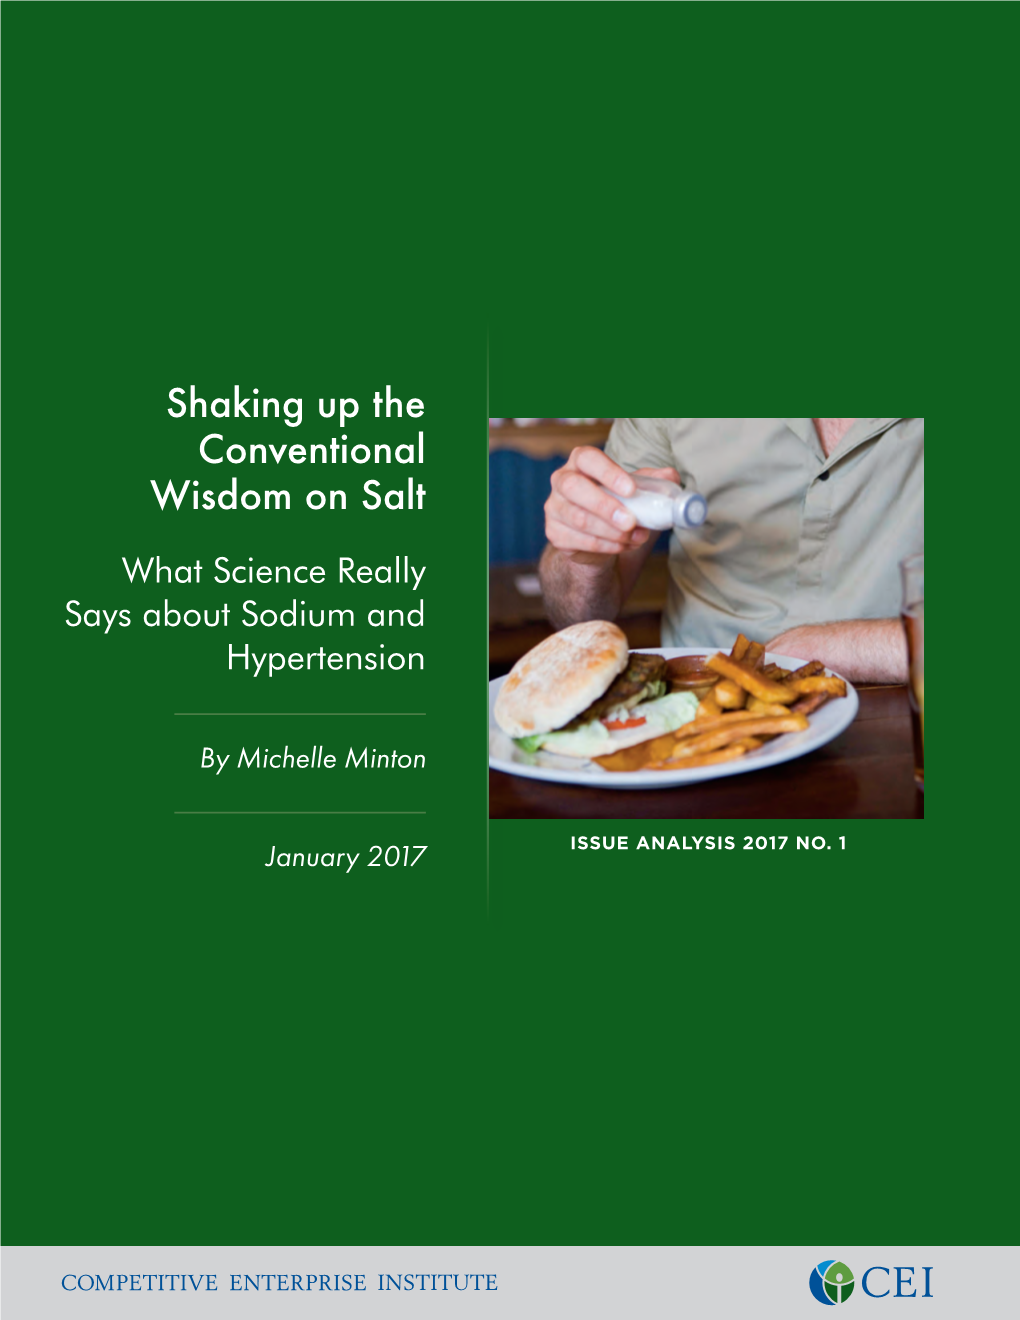 Shaking up the Conventional Wisdom on Salt